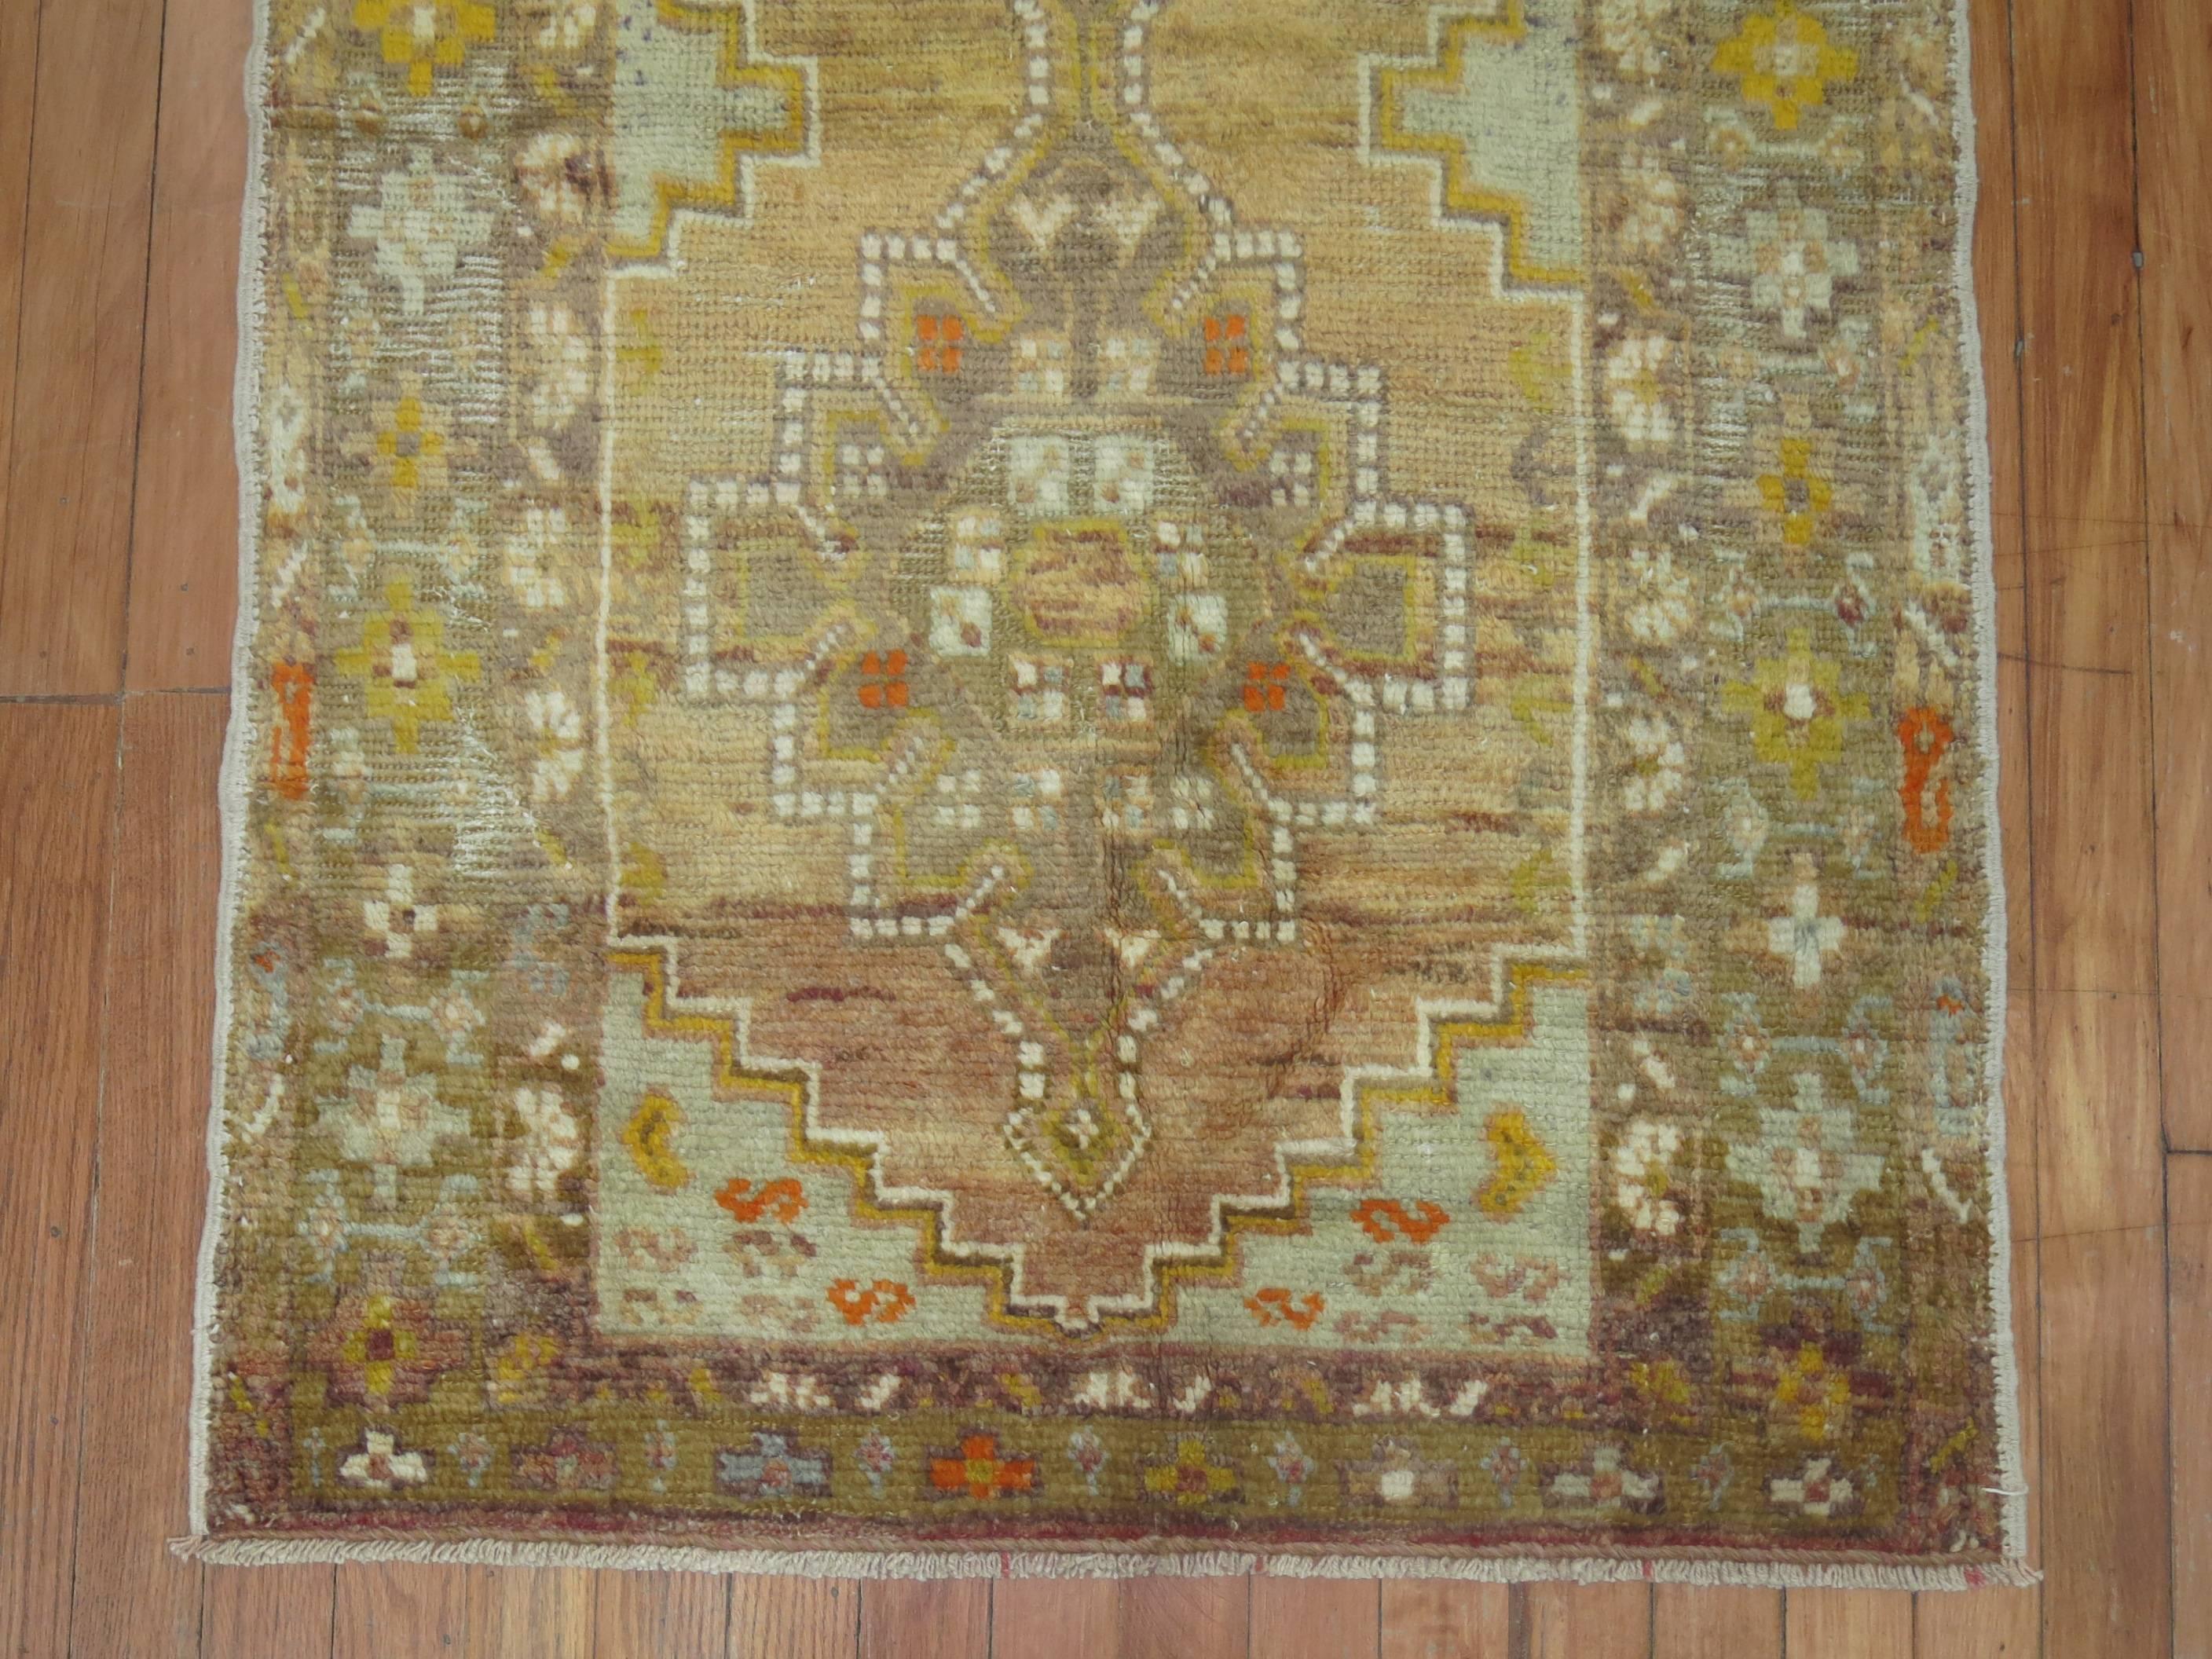 One of a kind vintage Turkish runner in gold, brown, beige and gray accents,

circa 1930s, measures: 2'7